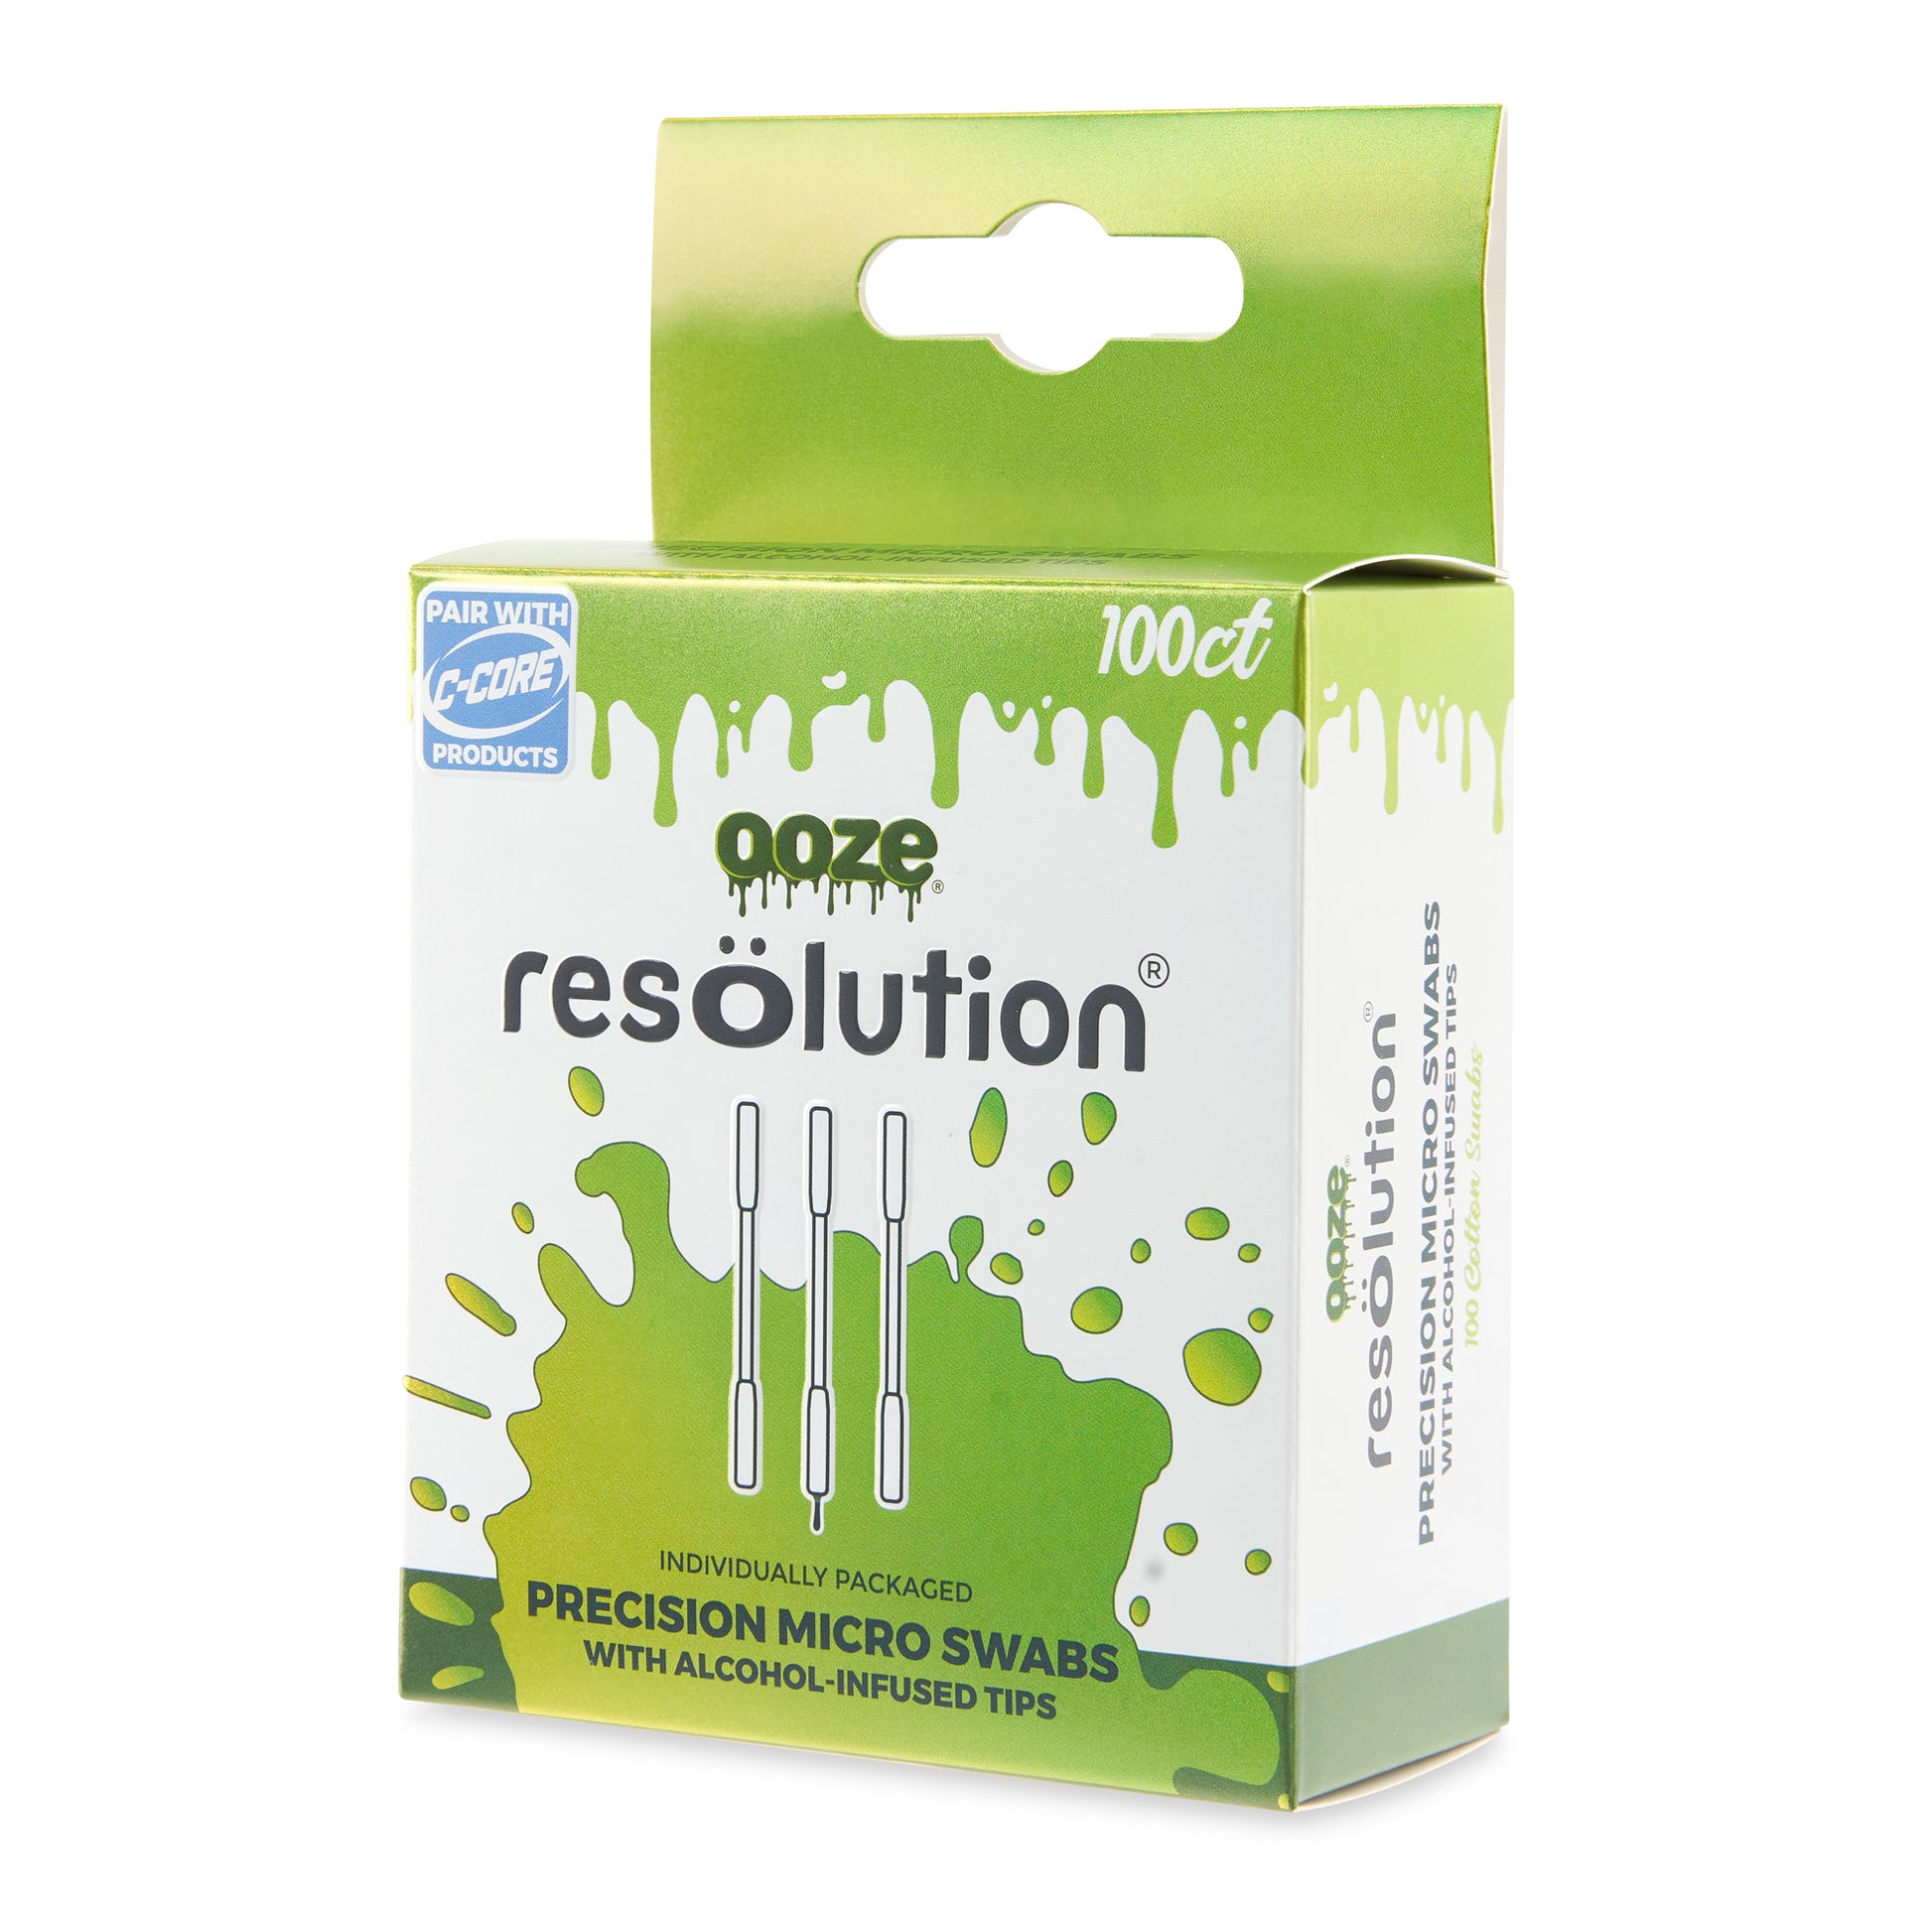 A 100ct box of Ooze Resolution Micro Swabs on an angle